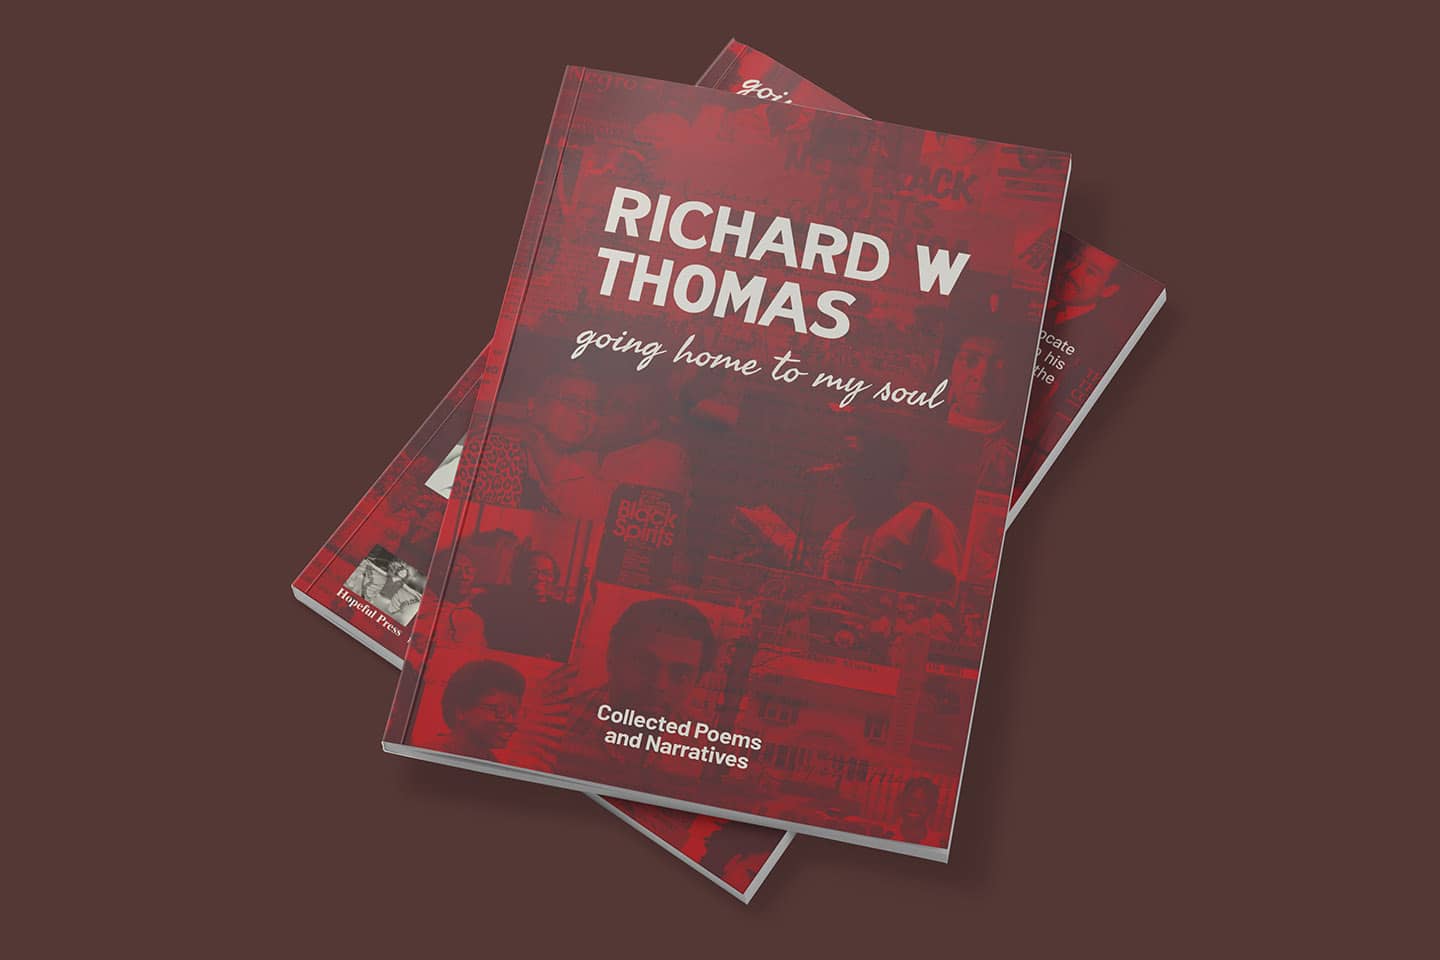 Laptop, smartphone and tablet all showing Richard Thomas' website home page